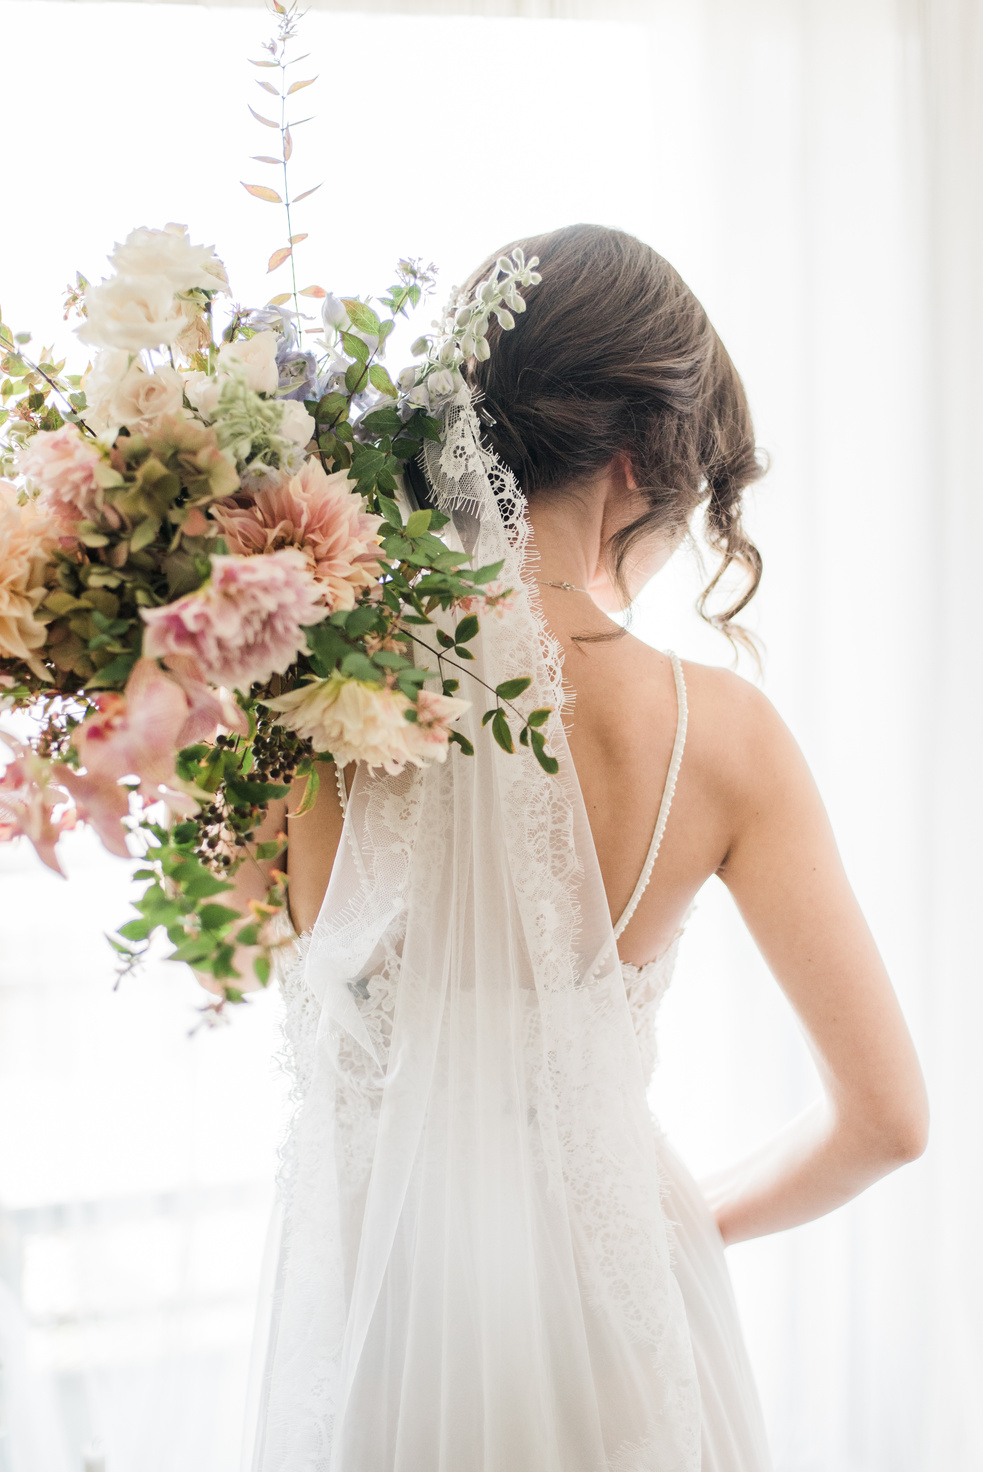 Woman in White Floral Wedding Dress Holding Bouquet of Flowers